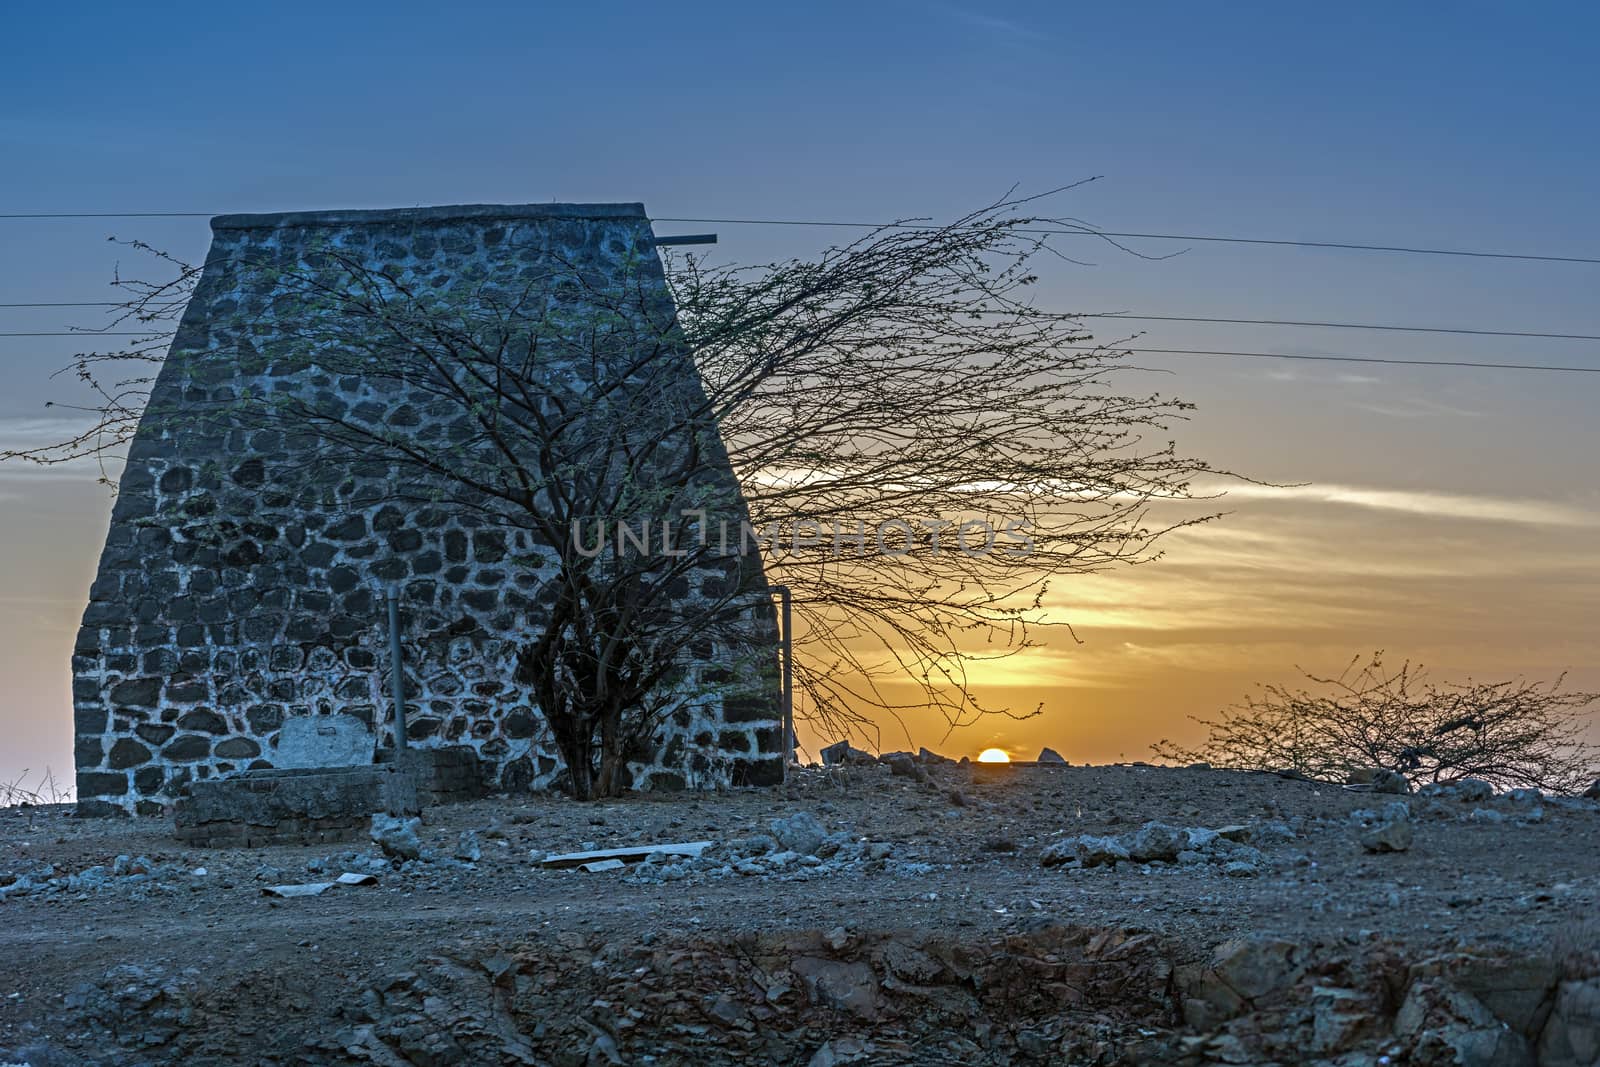 Sunrise behind an old stone structure in a small village in outskirts of city, Pune, India.